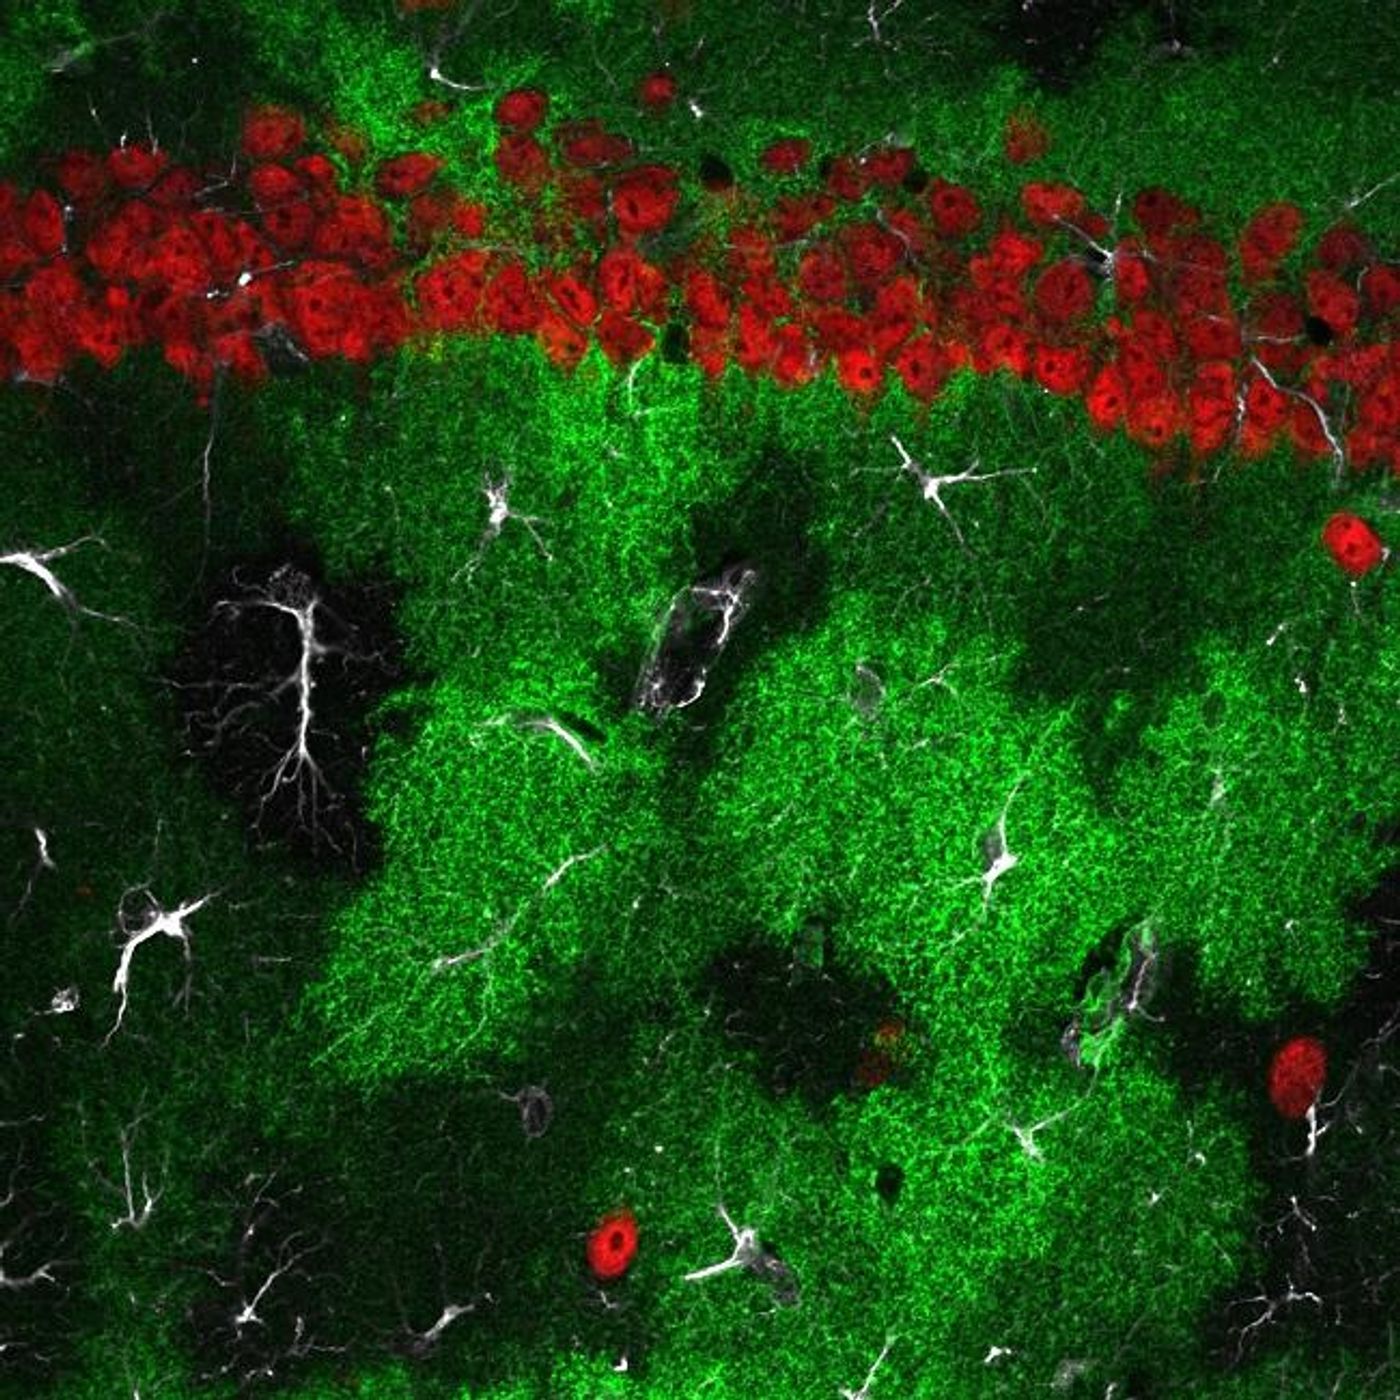 Research from Tufts University in the journal Neuron reports a new signaling pathway that directly connects major brain receptors associated with learning and memory. Astrocytes (fluorescing green cells above) are the key element that links the receptors. Neurons are red. / Credit: Thomas Papouin